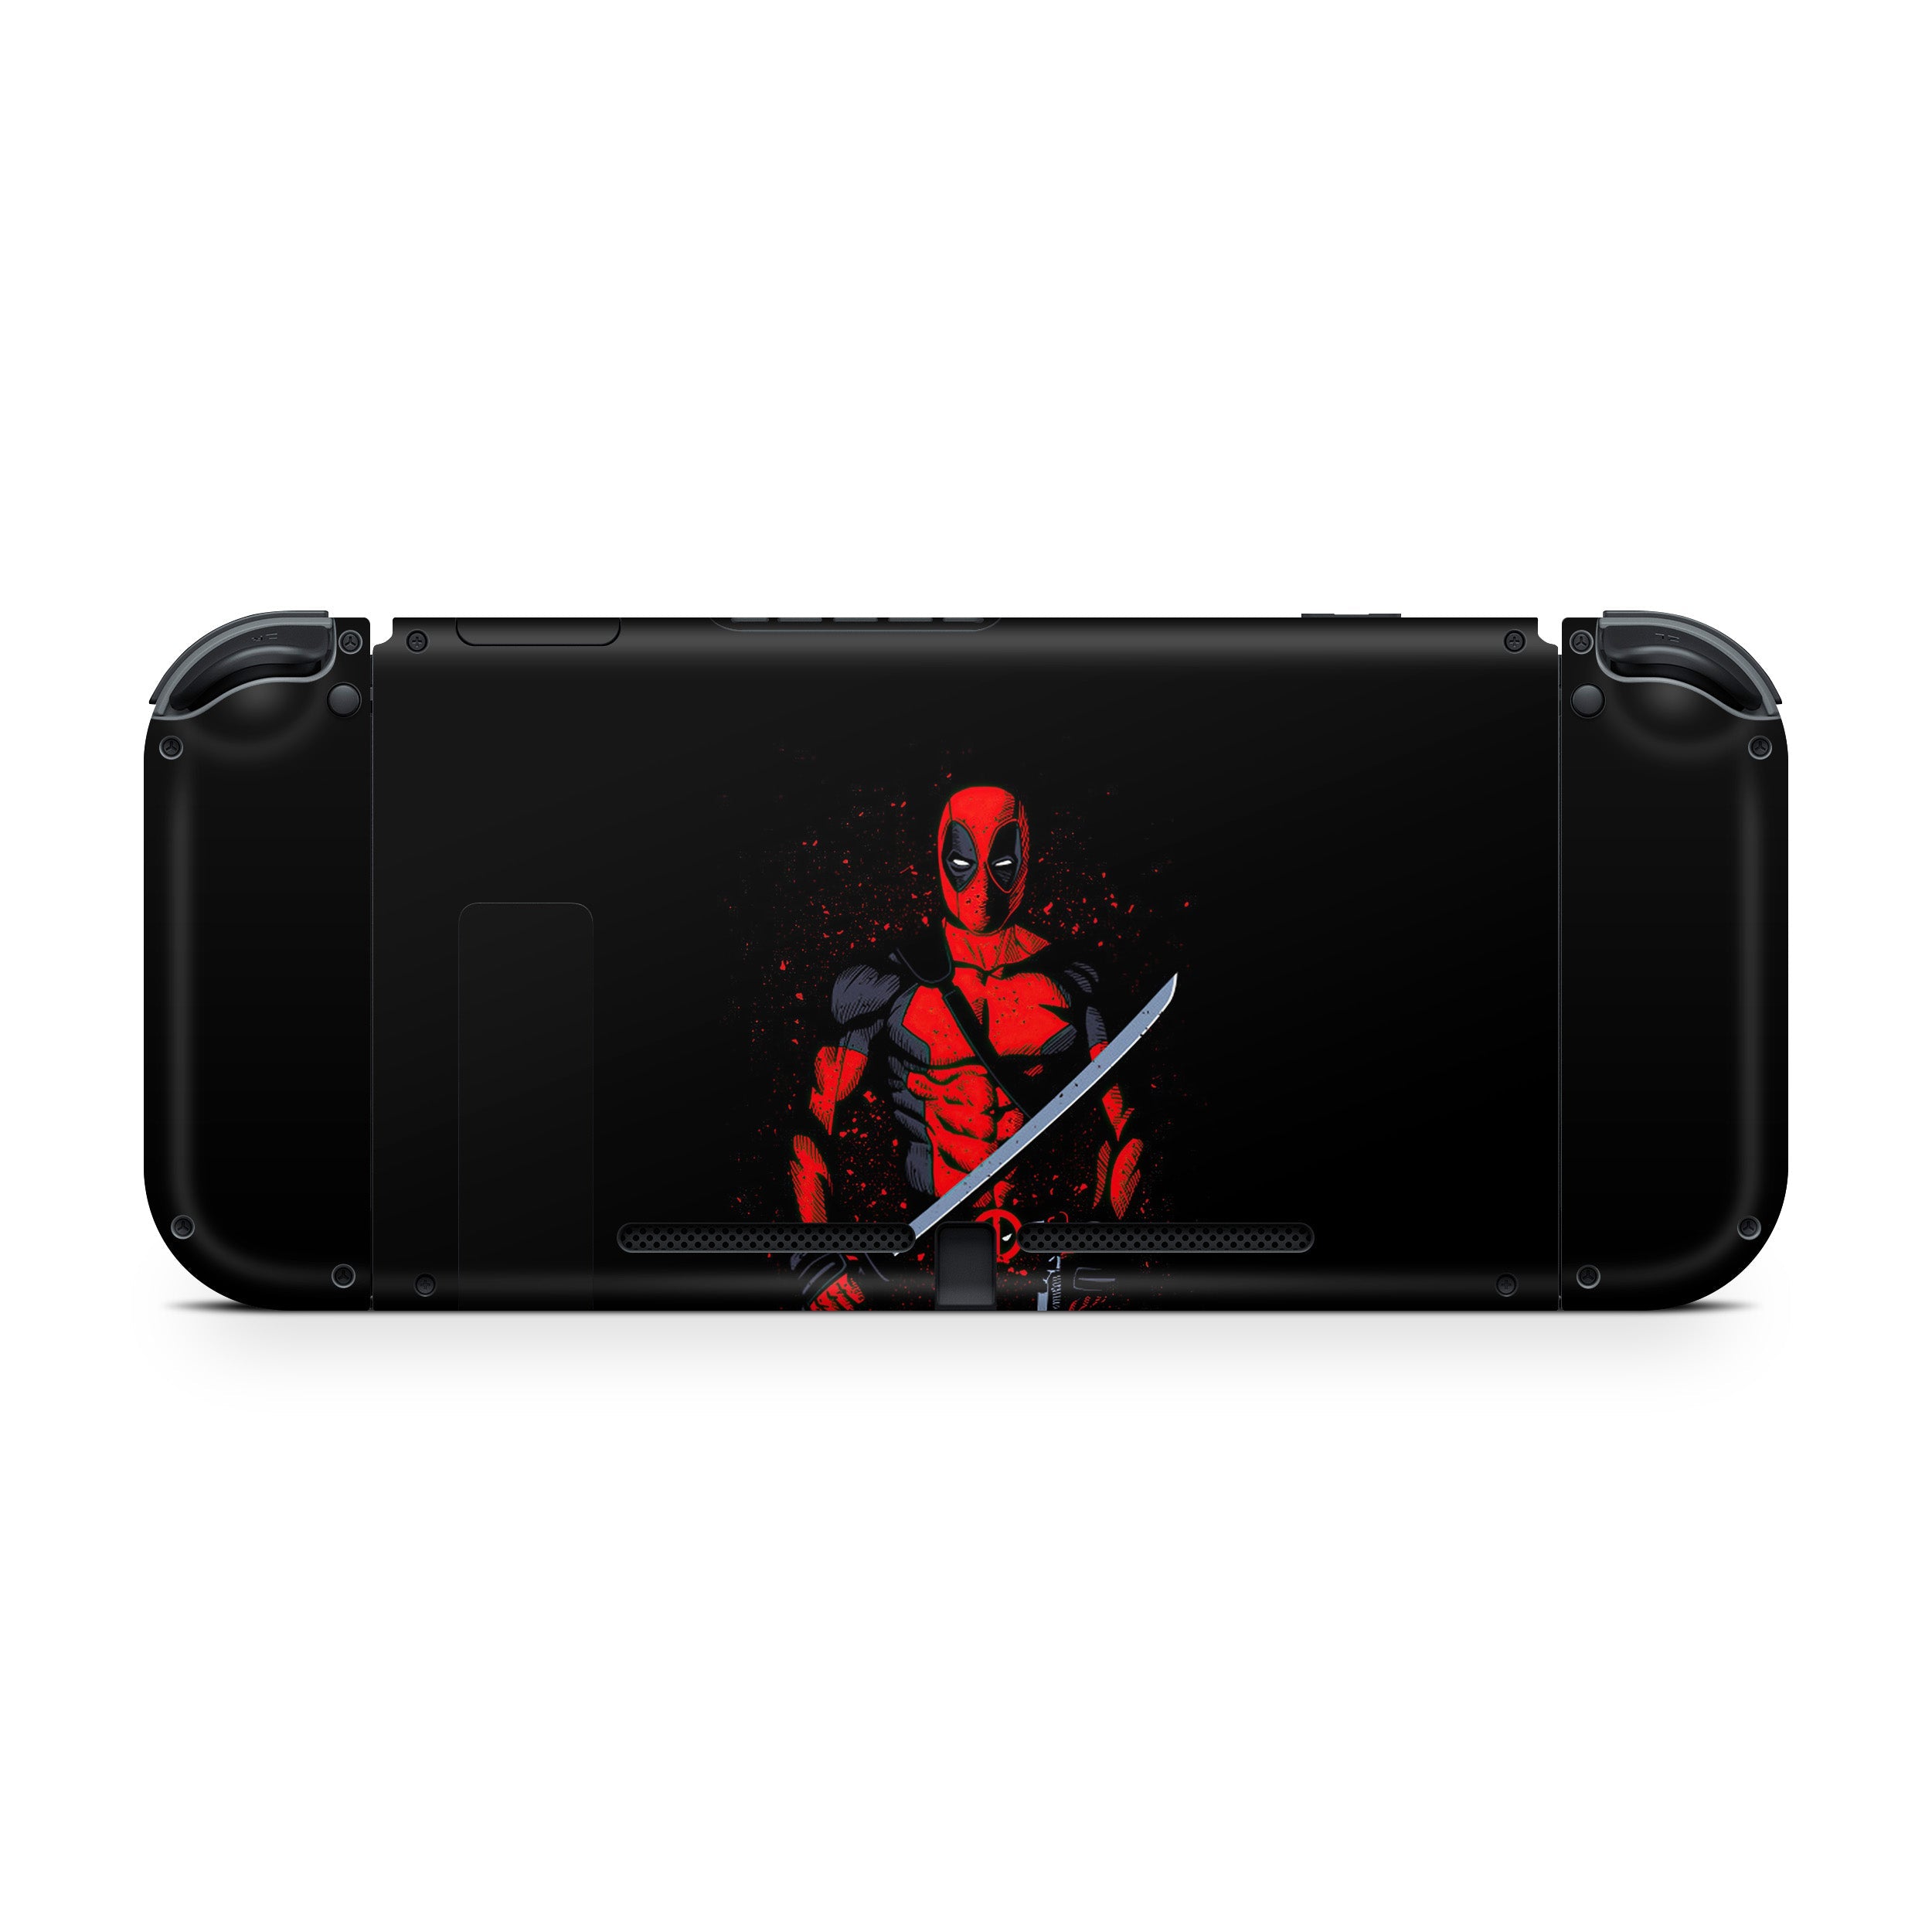 A video game skin featuring a Marvel Comics Deadpool design for the Nintendo Switch.